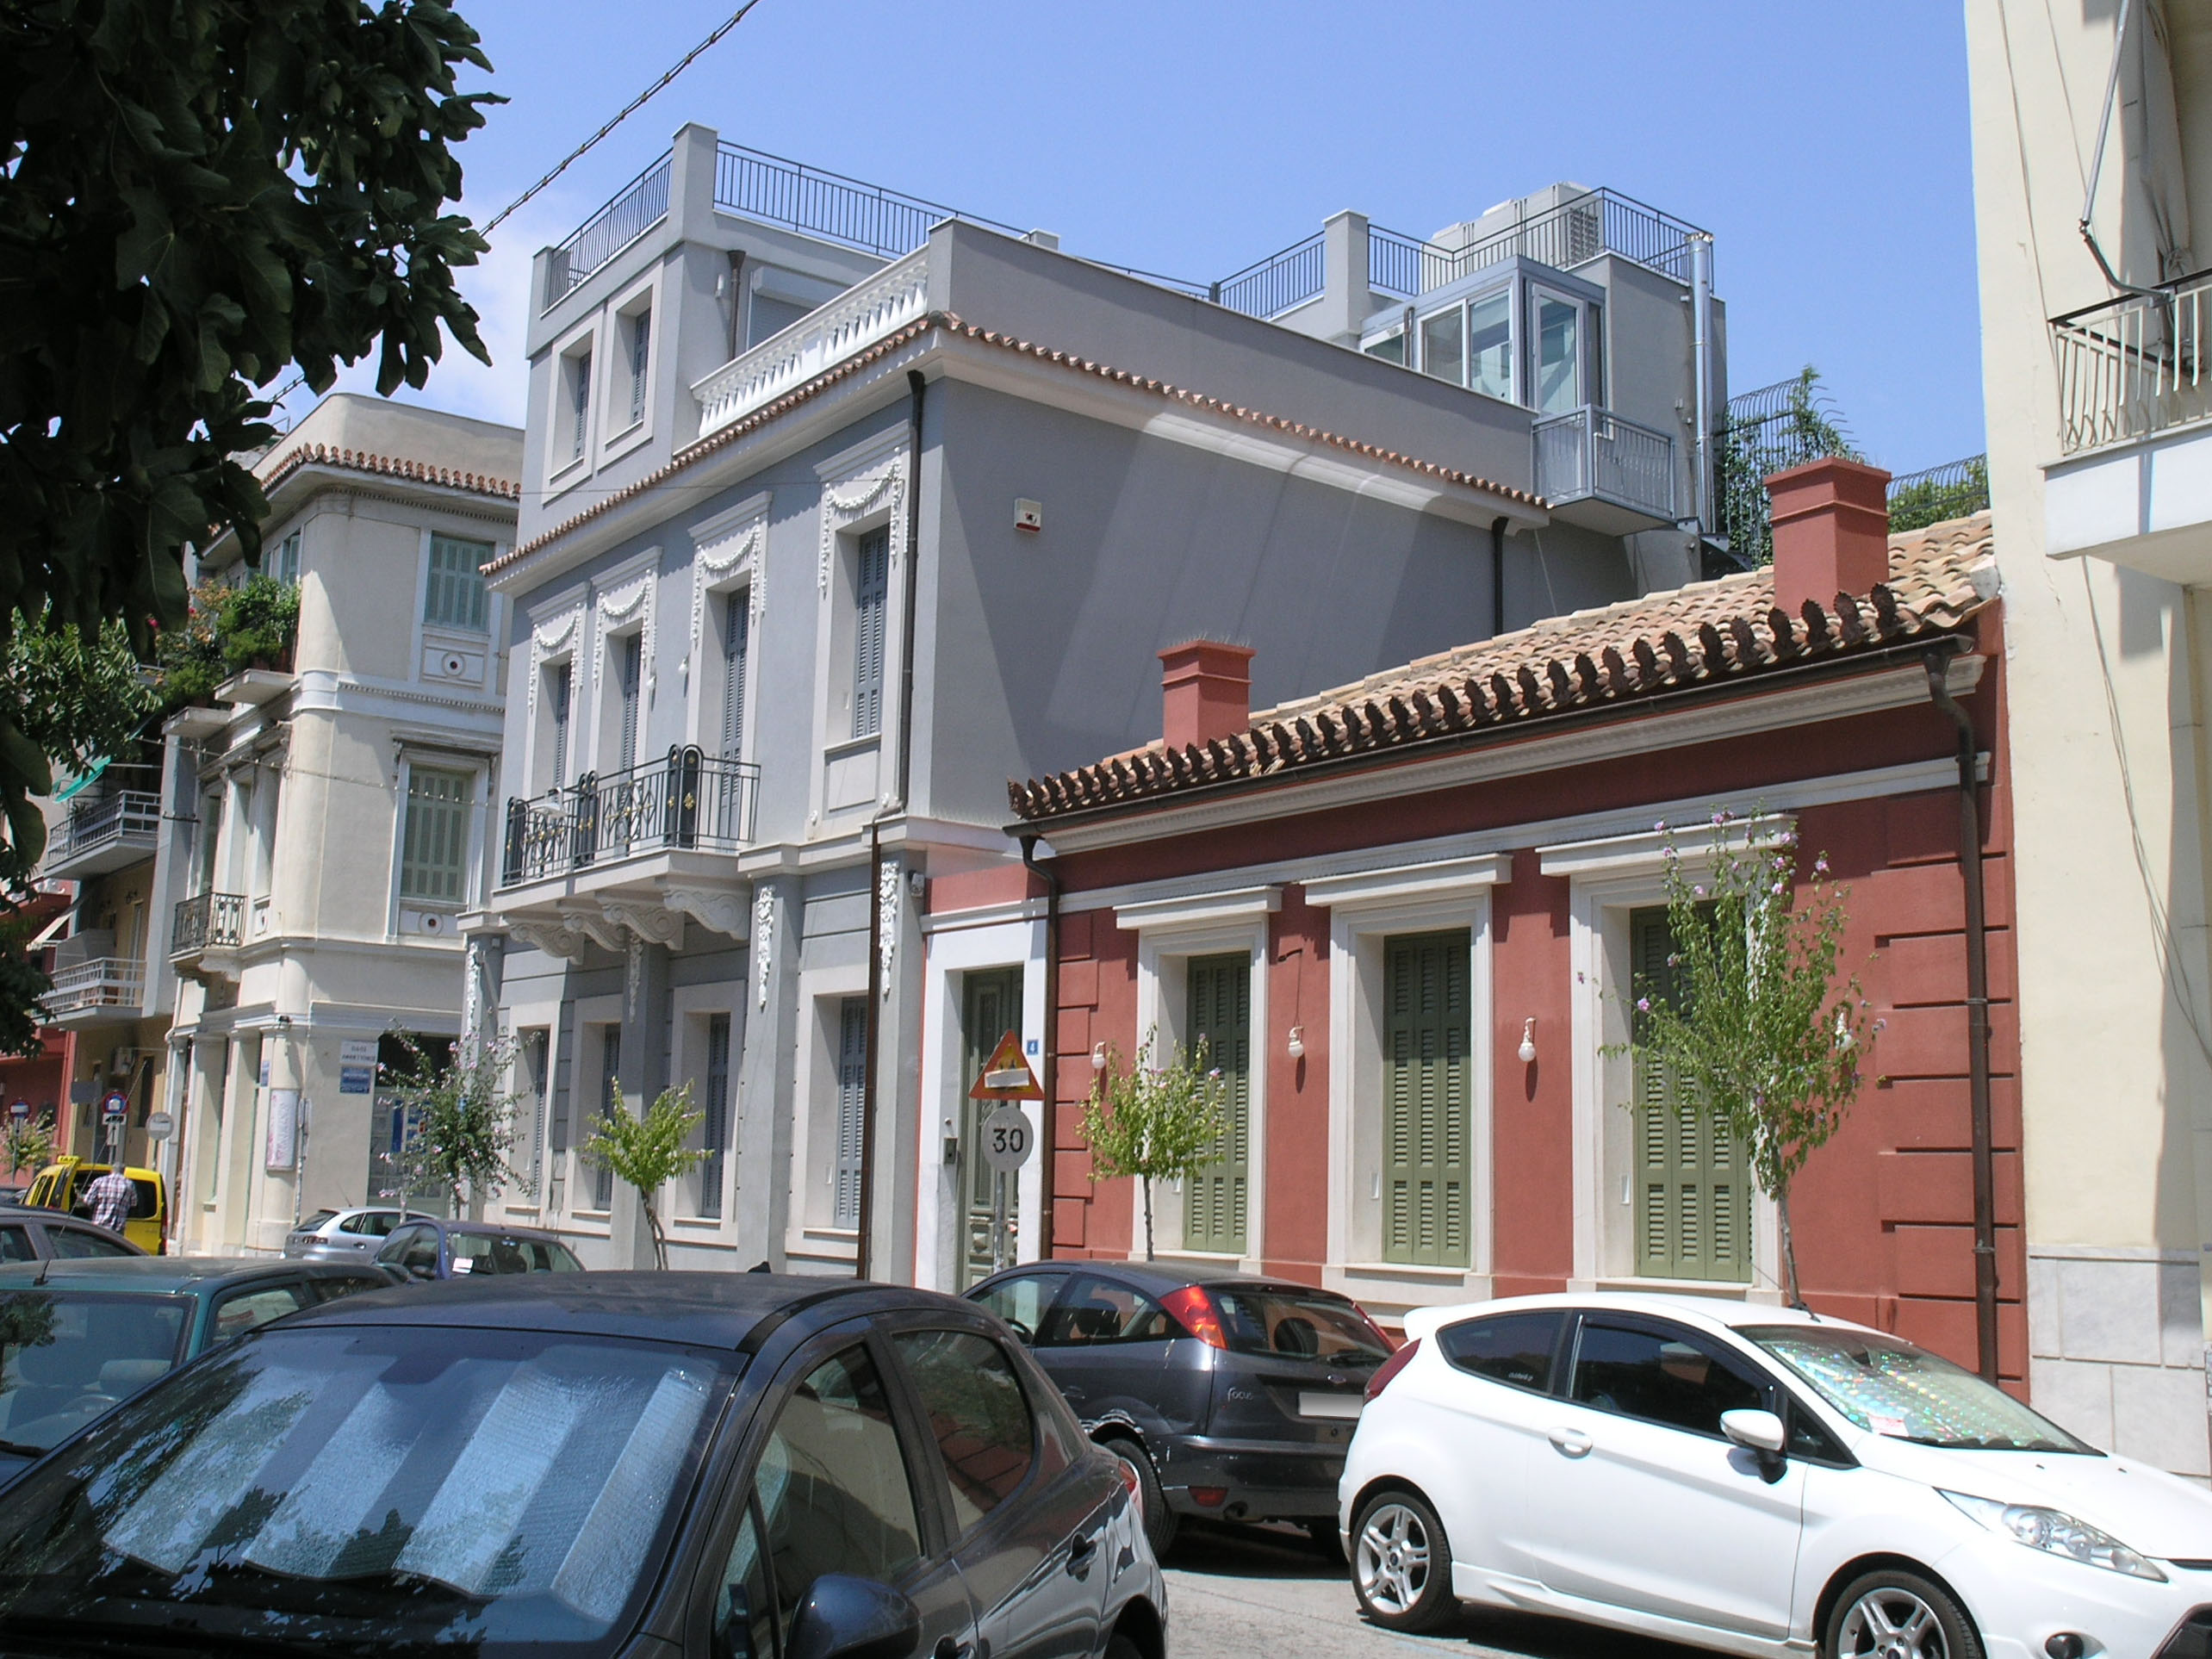 General view of buildings 4 and 6 on Poulopoulou Ilia str.